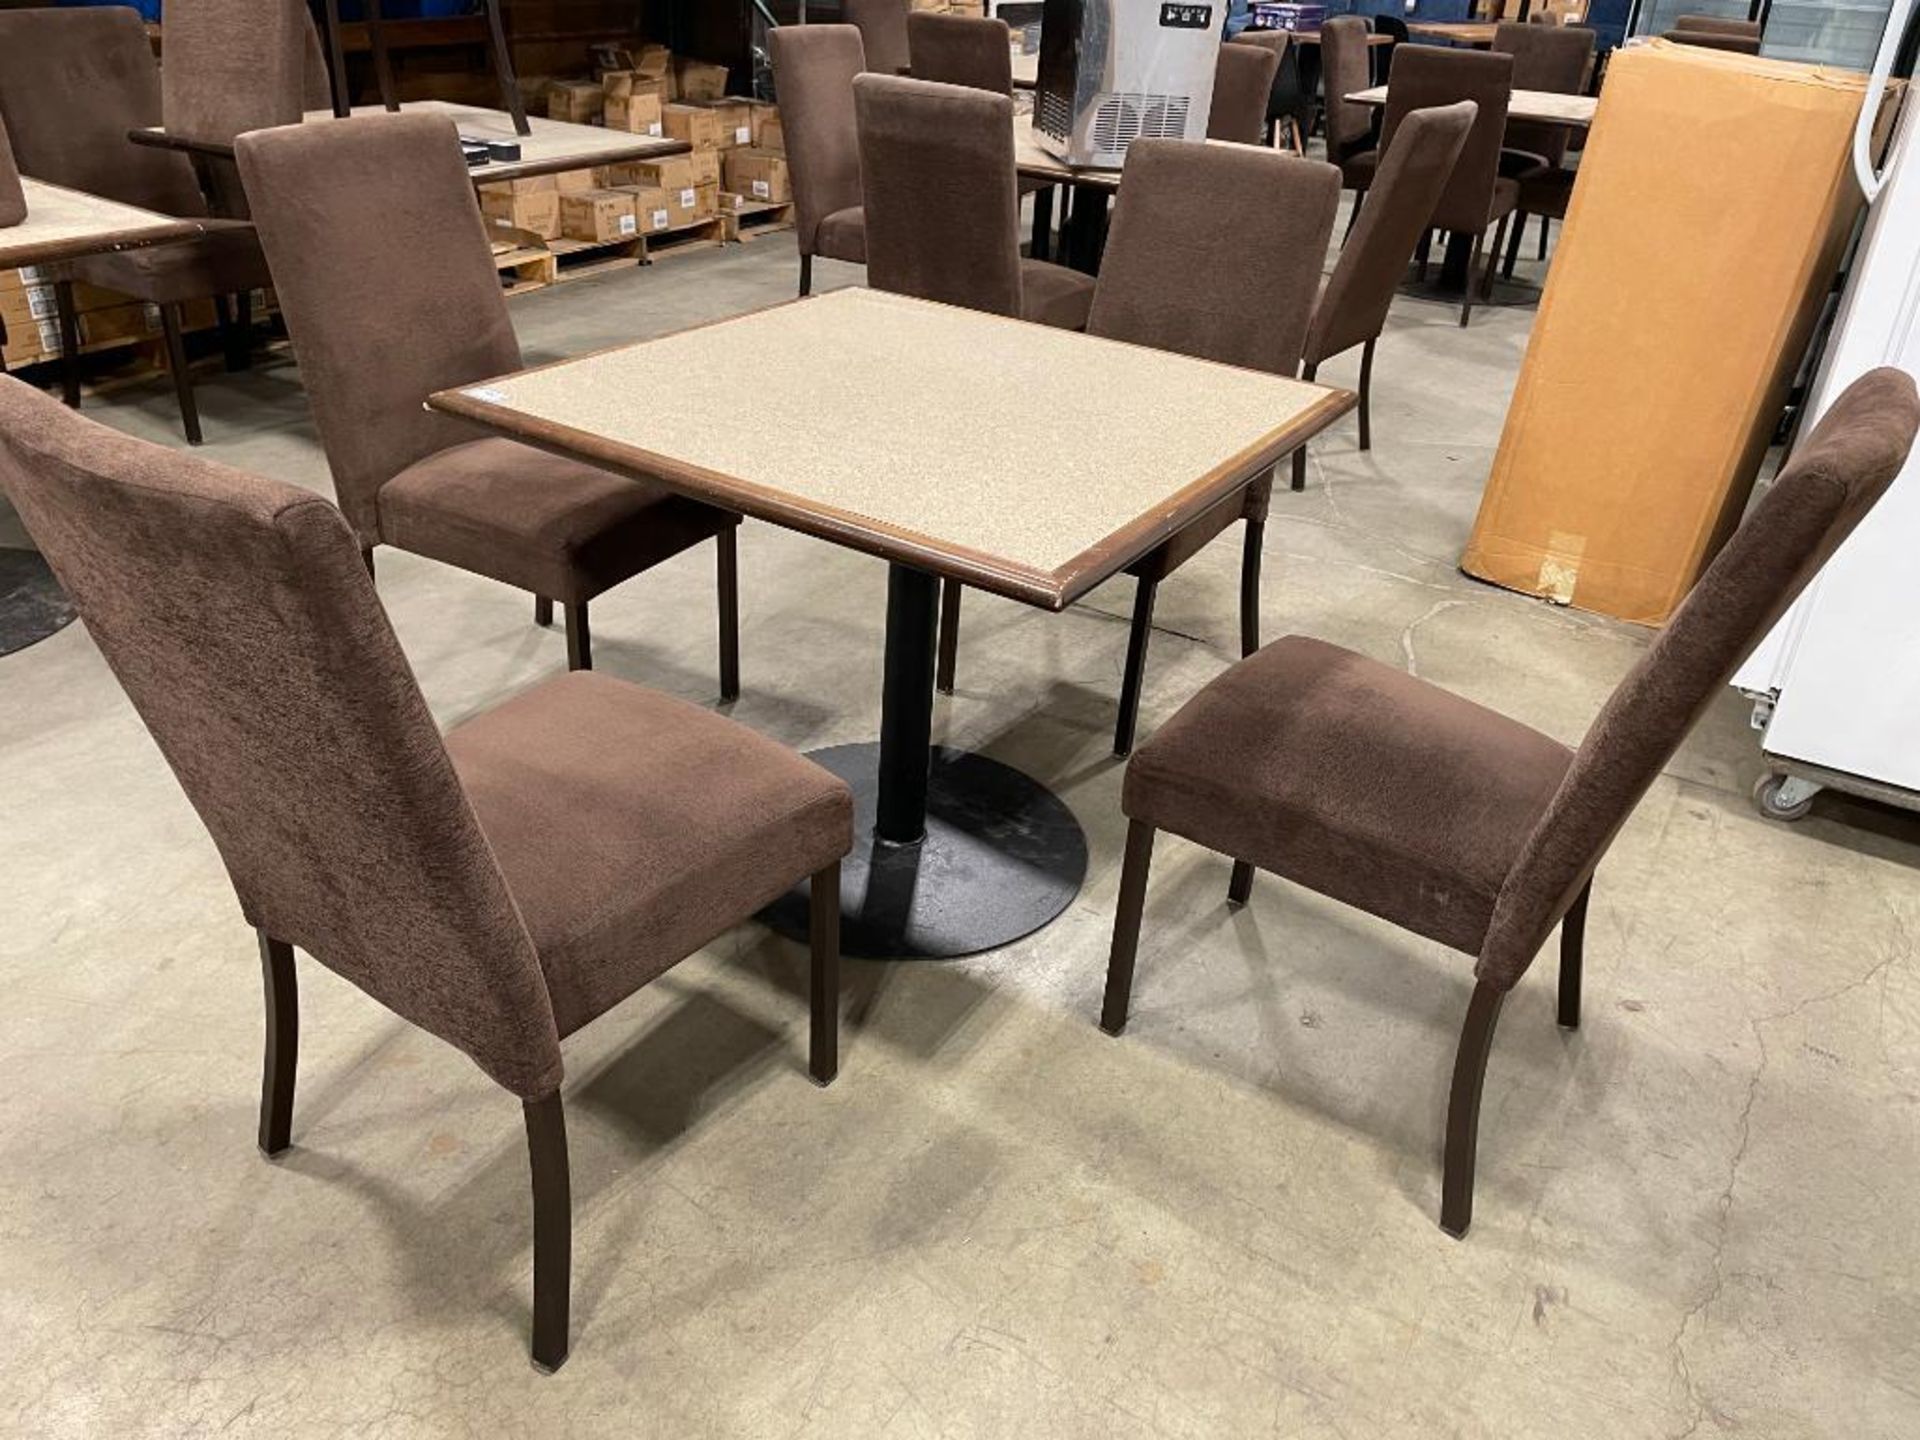 36" X 36" DINING TABLE WITH (4) MTS KILO DINING CHAIRS - Image 2 of 9